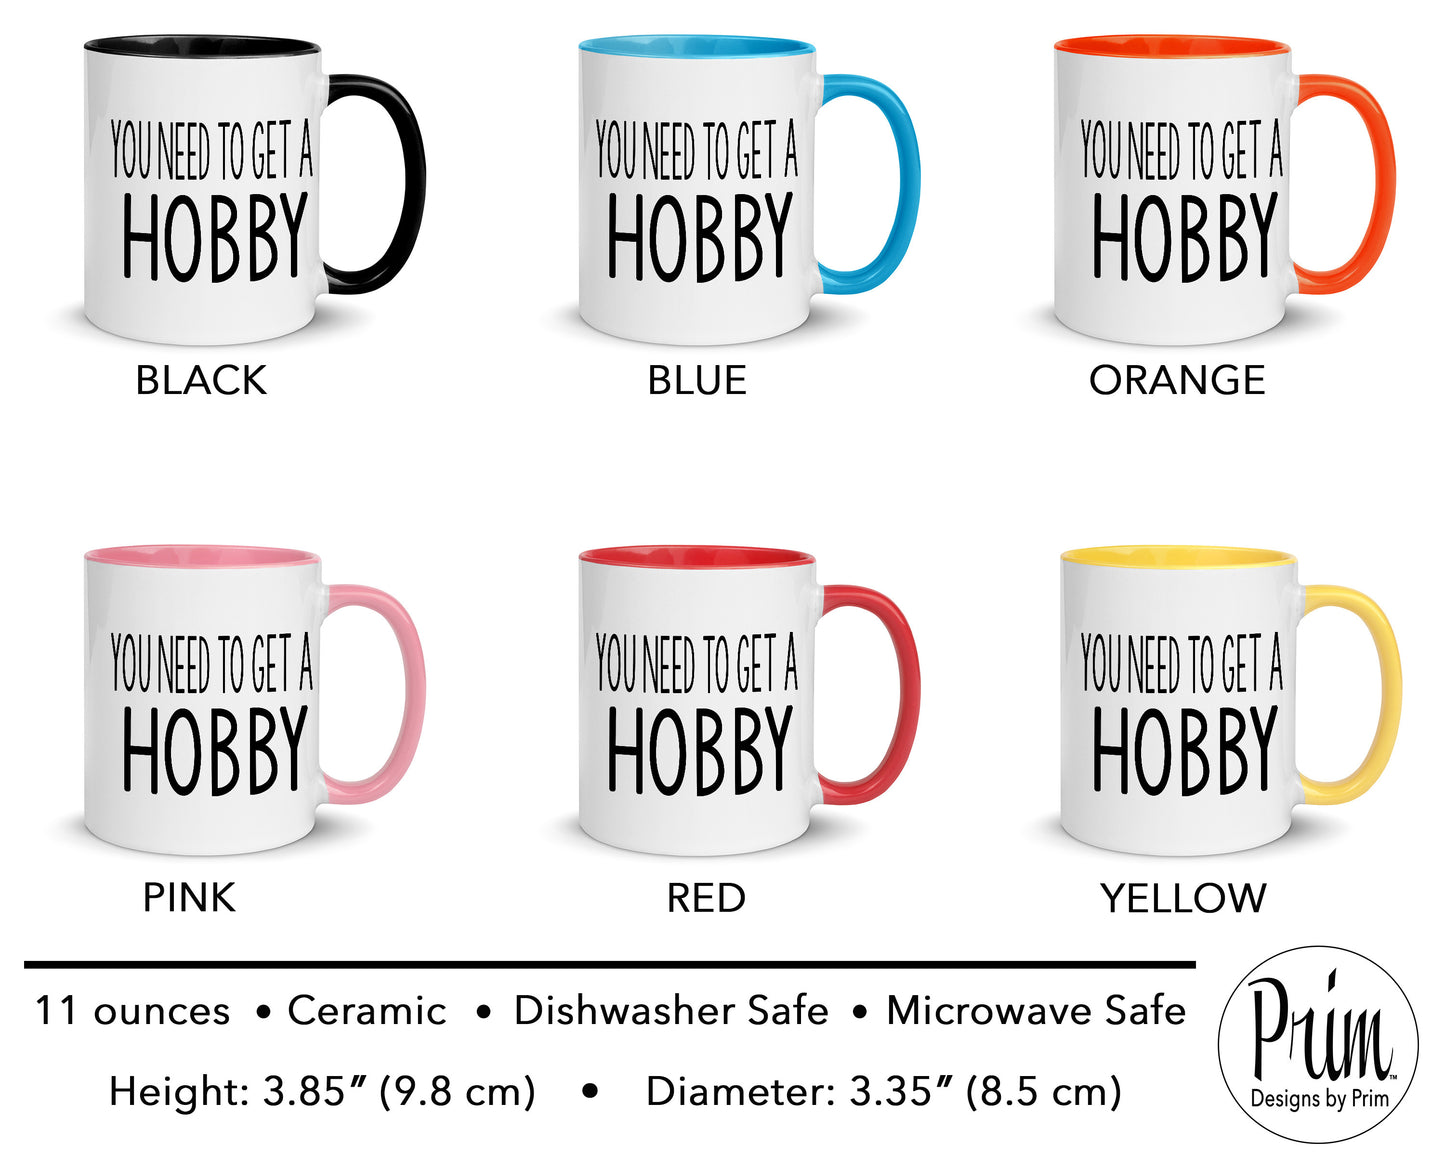 Designs by Prim You Need To Get A Hobby Bethenny Frankel 11 Ounce Ceramic Mug | Real Housewives of New York Bravo Franchise Funny Quote Tea Coffee Cup